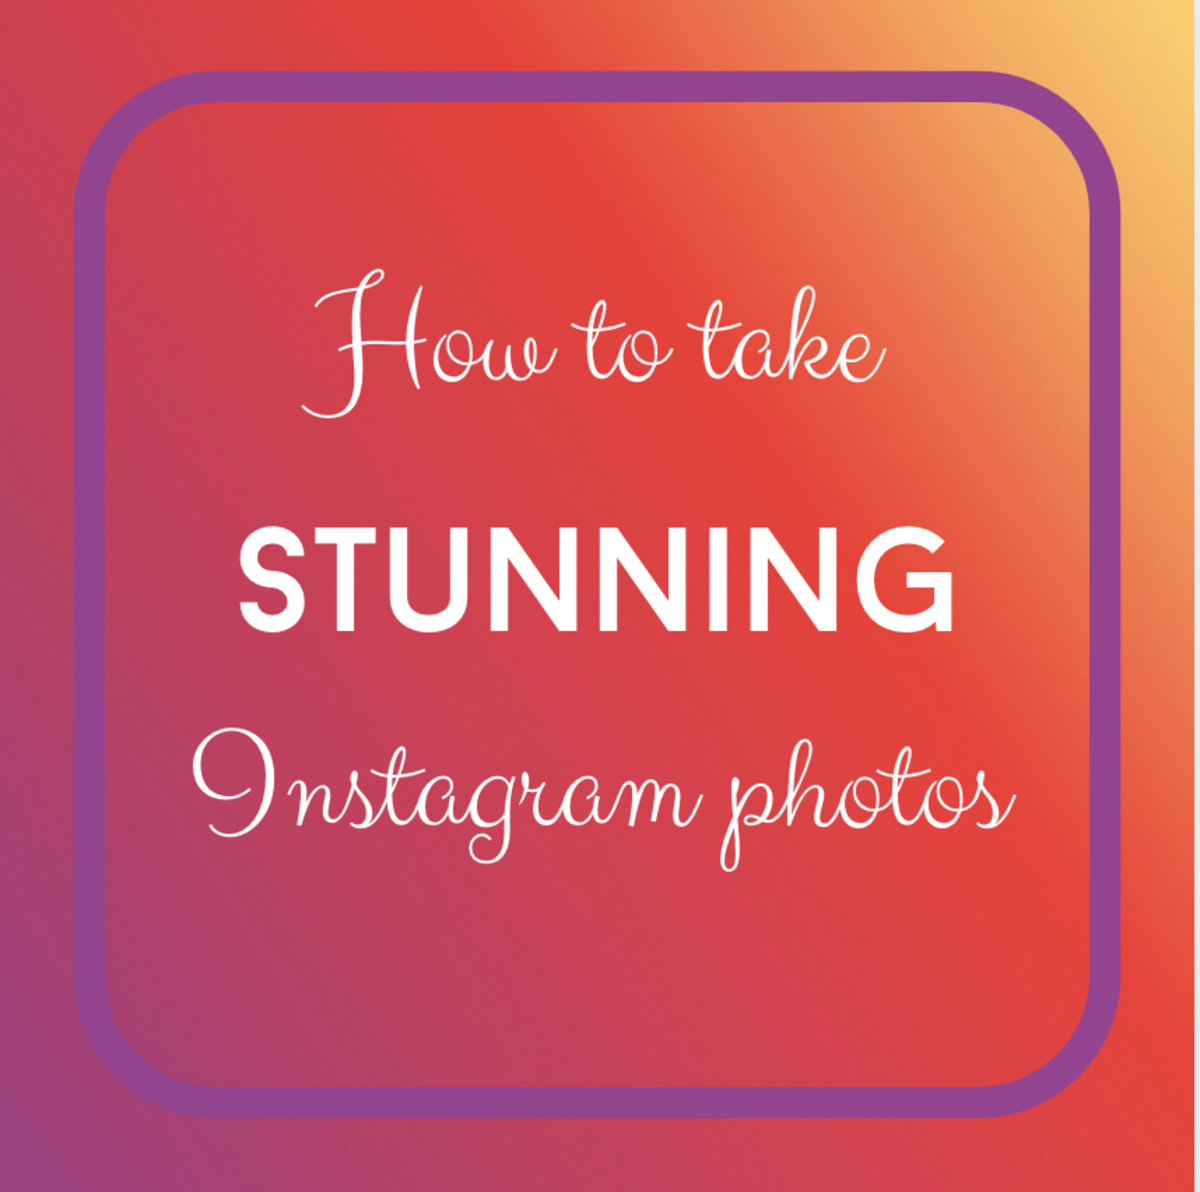 Jazz up your Instagram feed with these simple tips and tricks.